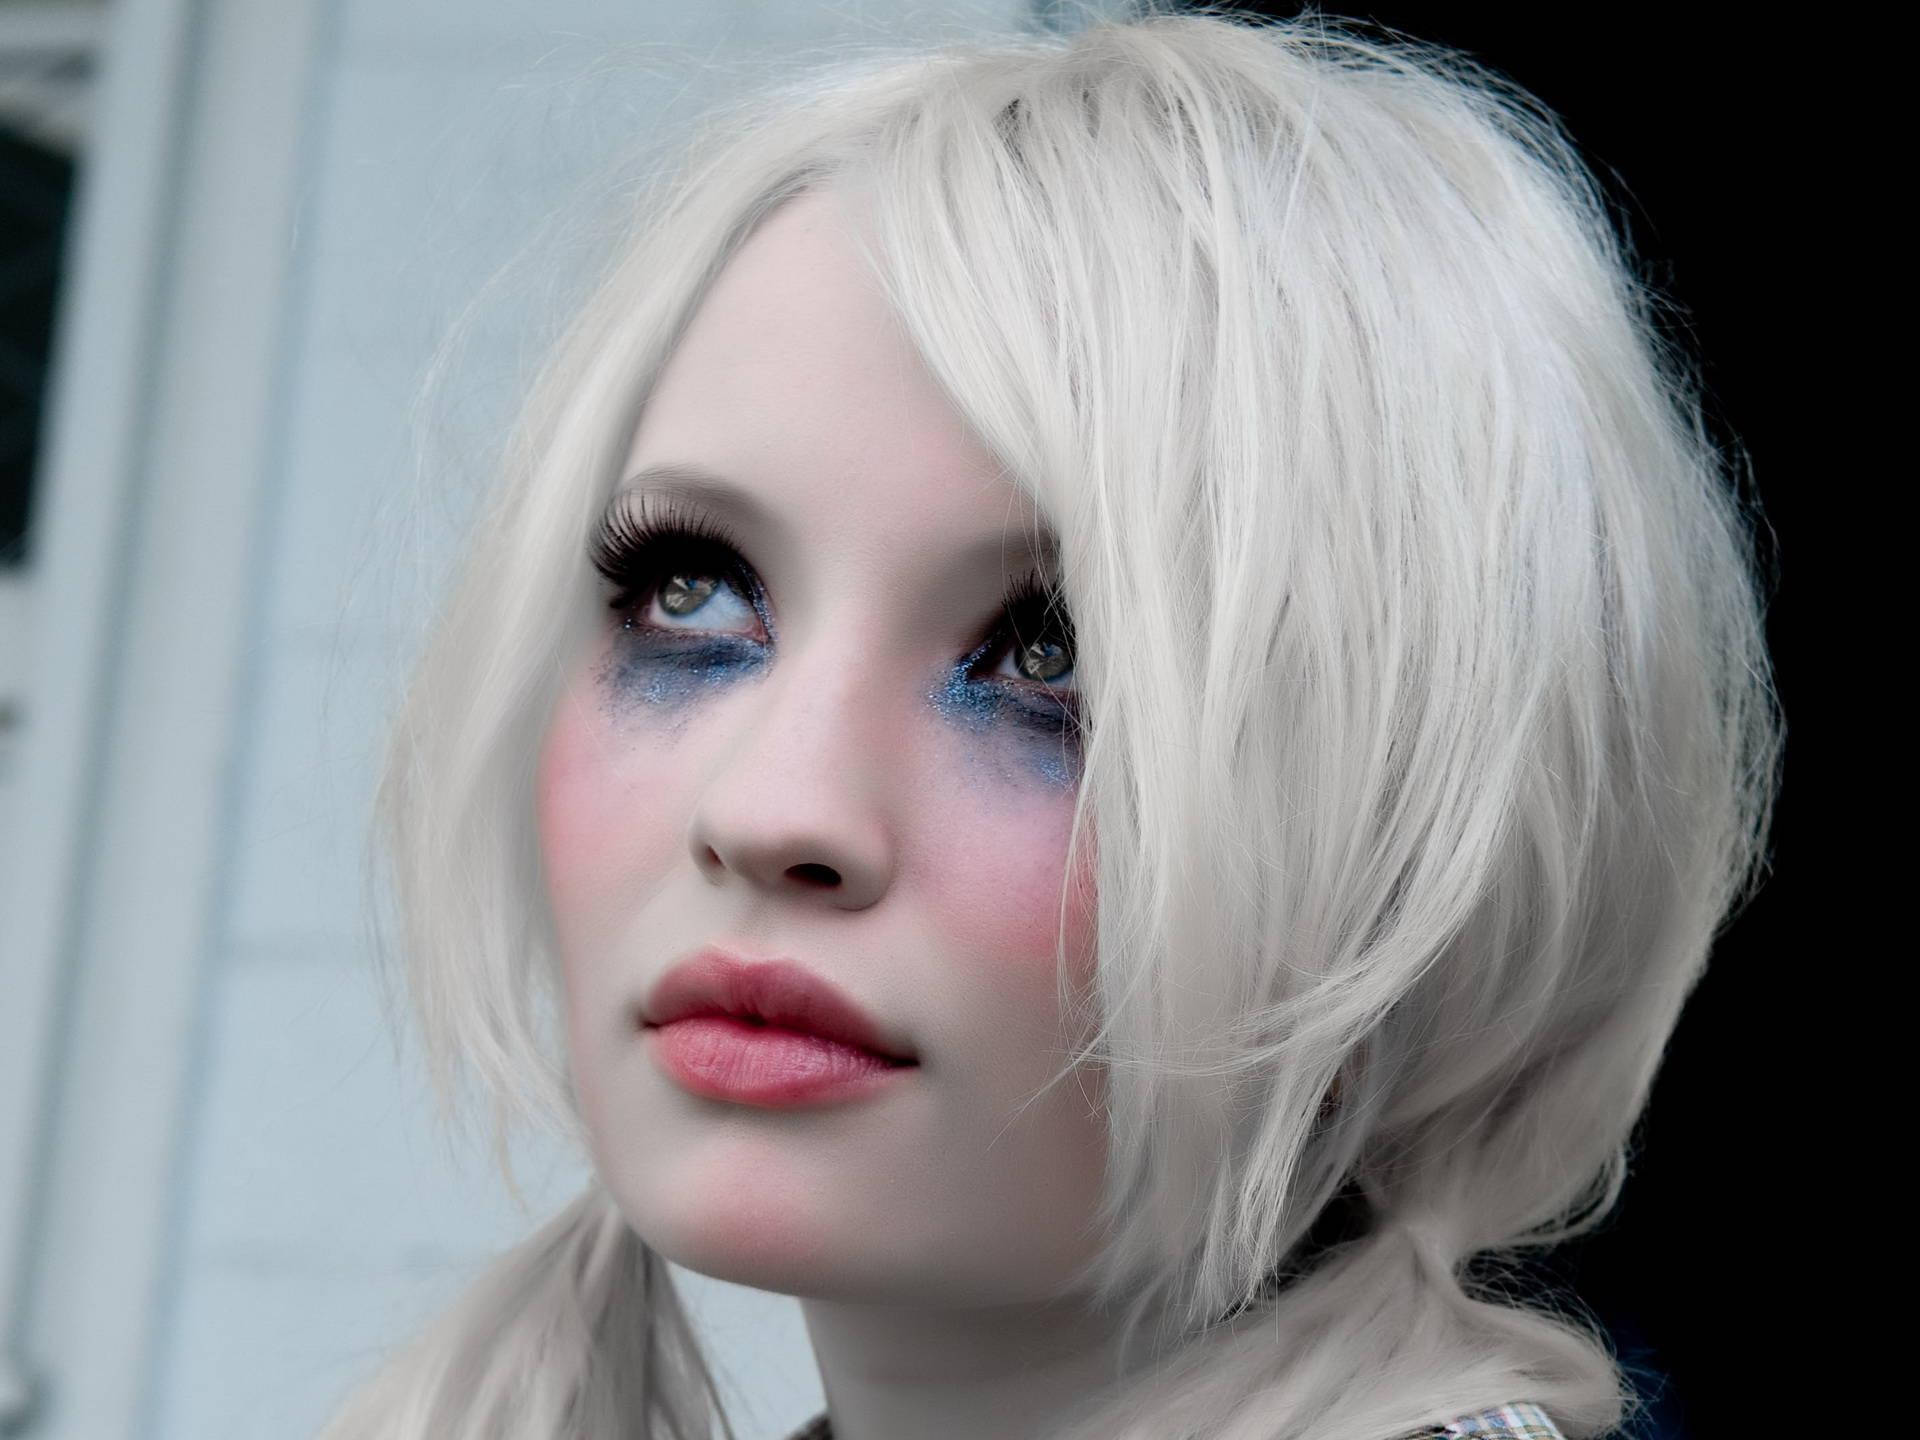 Australian Singer And Actress Emily Browning As Baby Doll Wallpaper